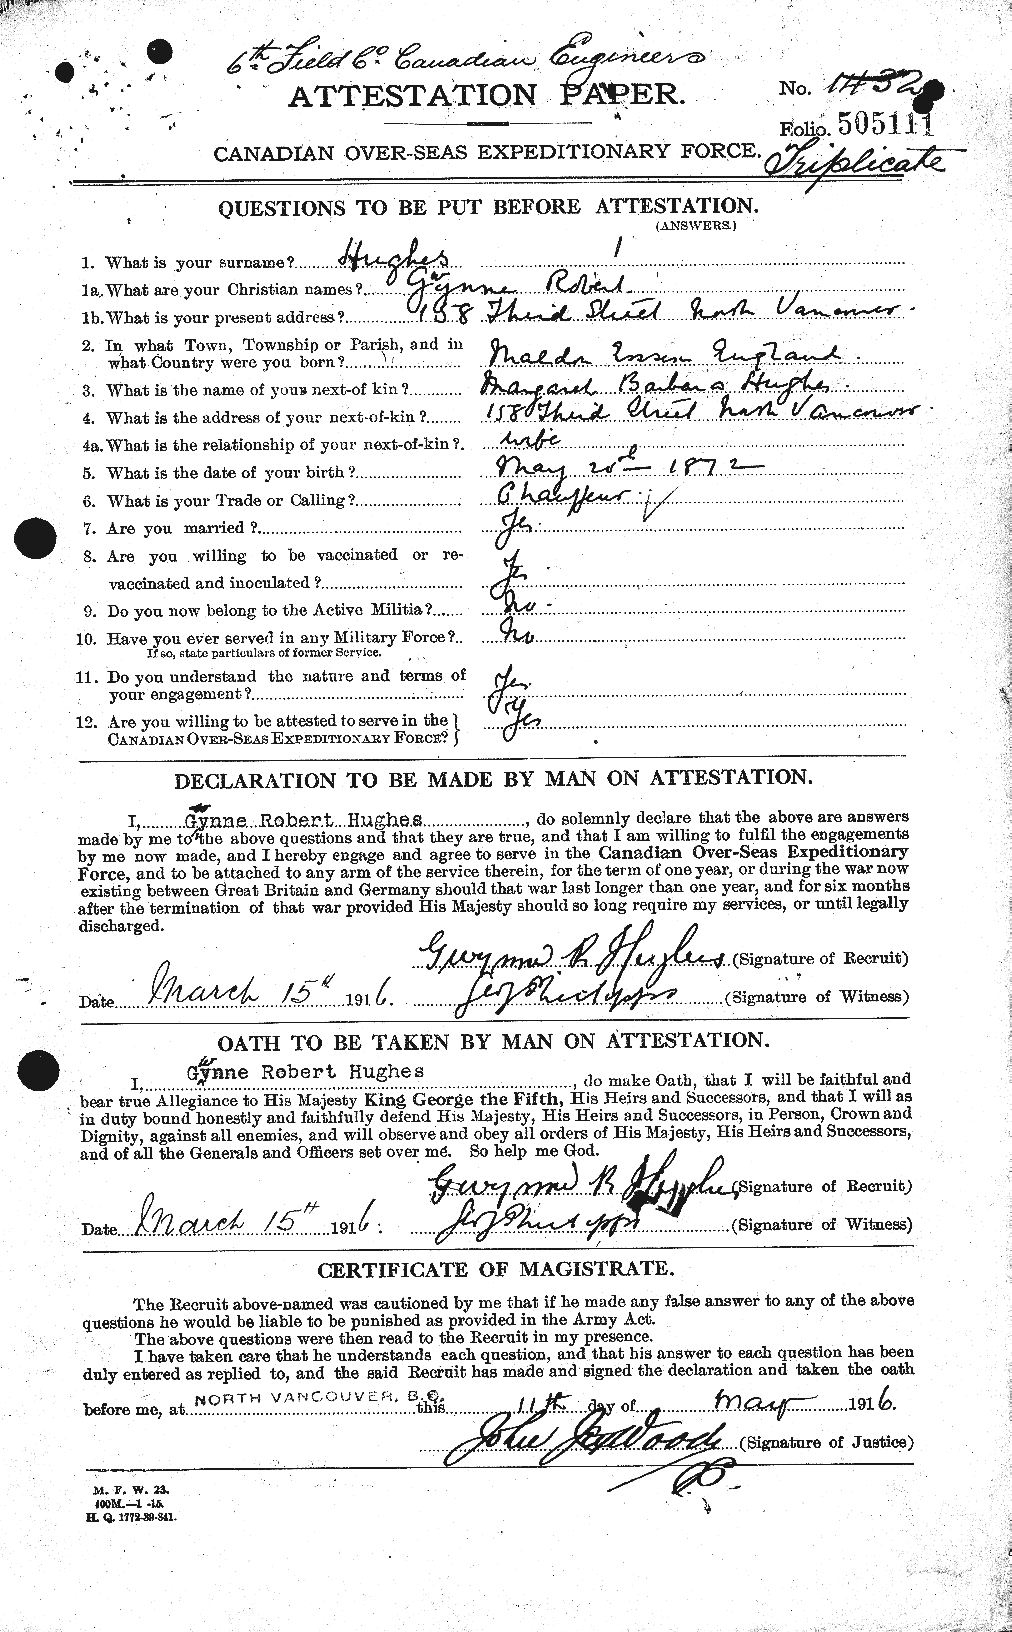 Personnel Records of the First World War - CEF 403854a